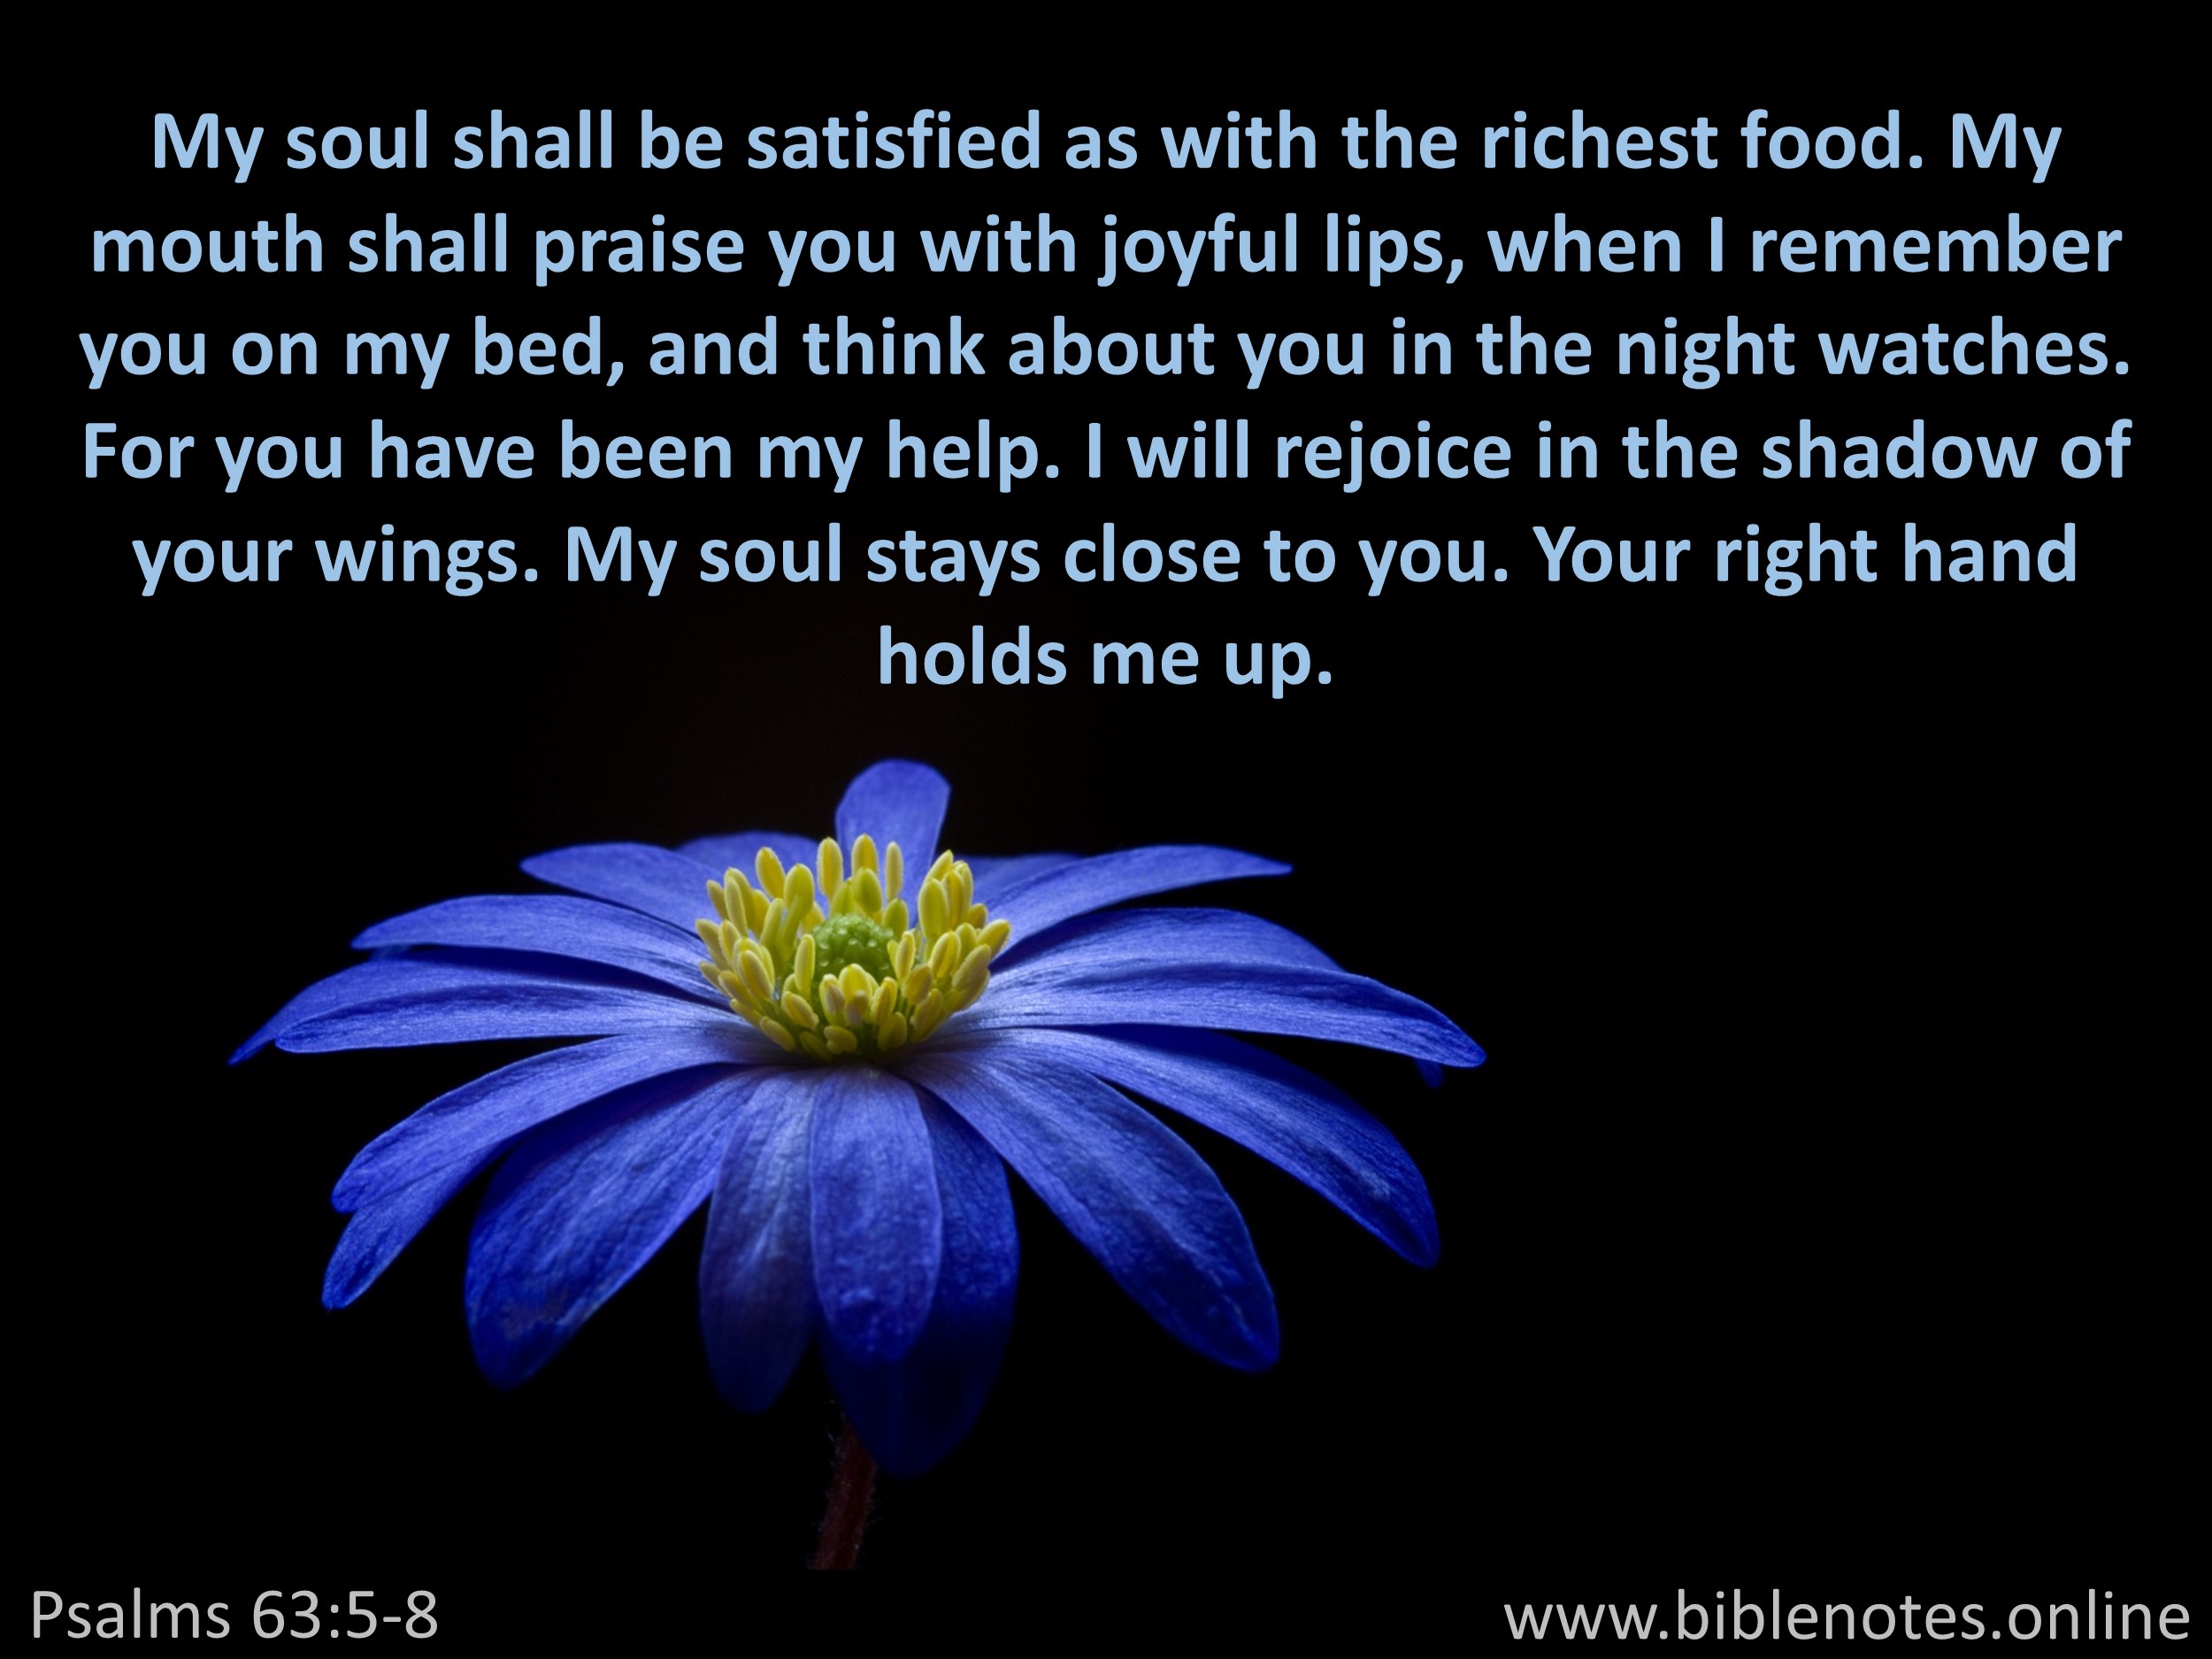 Bible Verse from Psalms Chapter 63